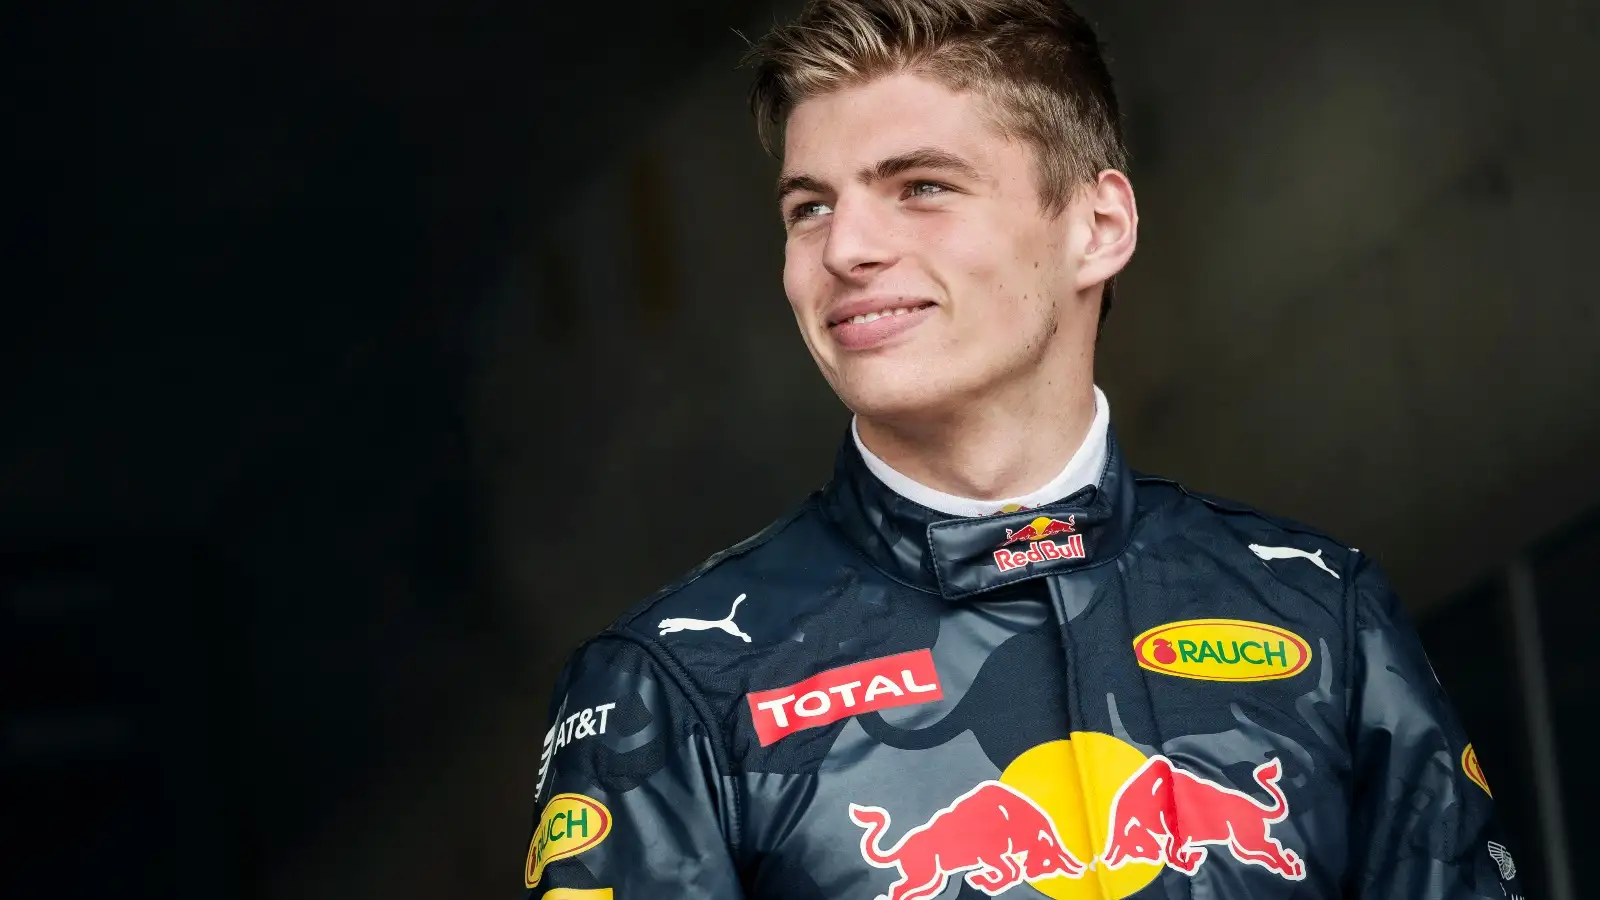 Max Verstappen in his first year racing for Red Bull.